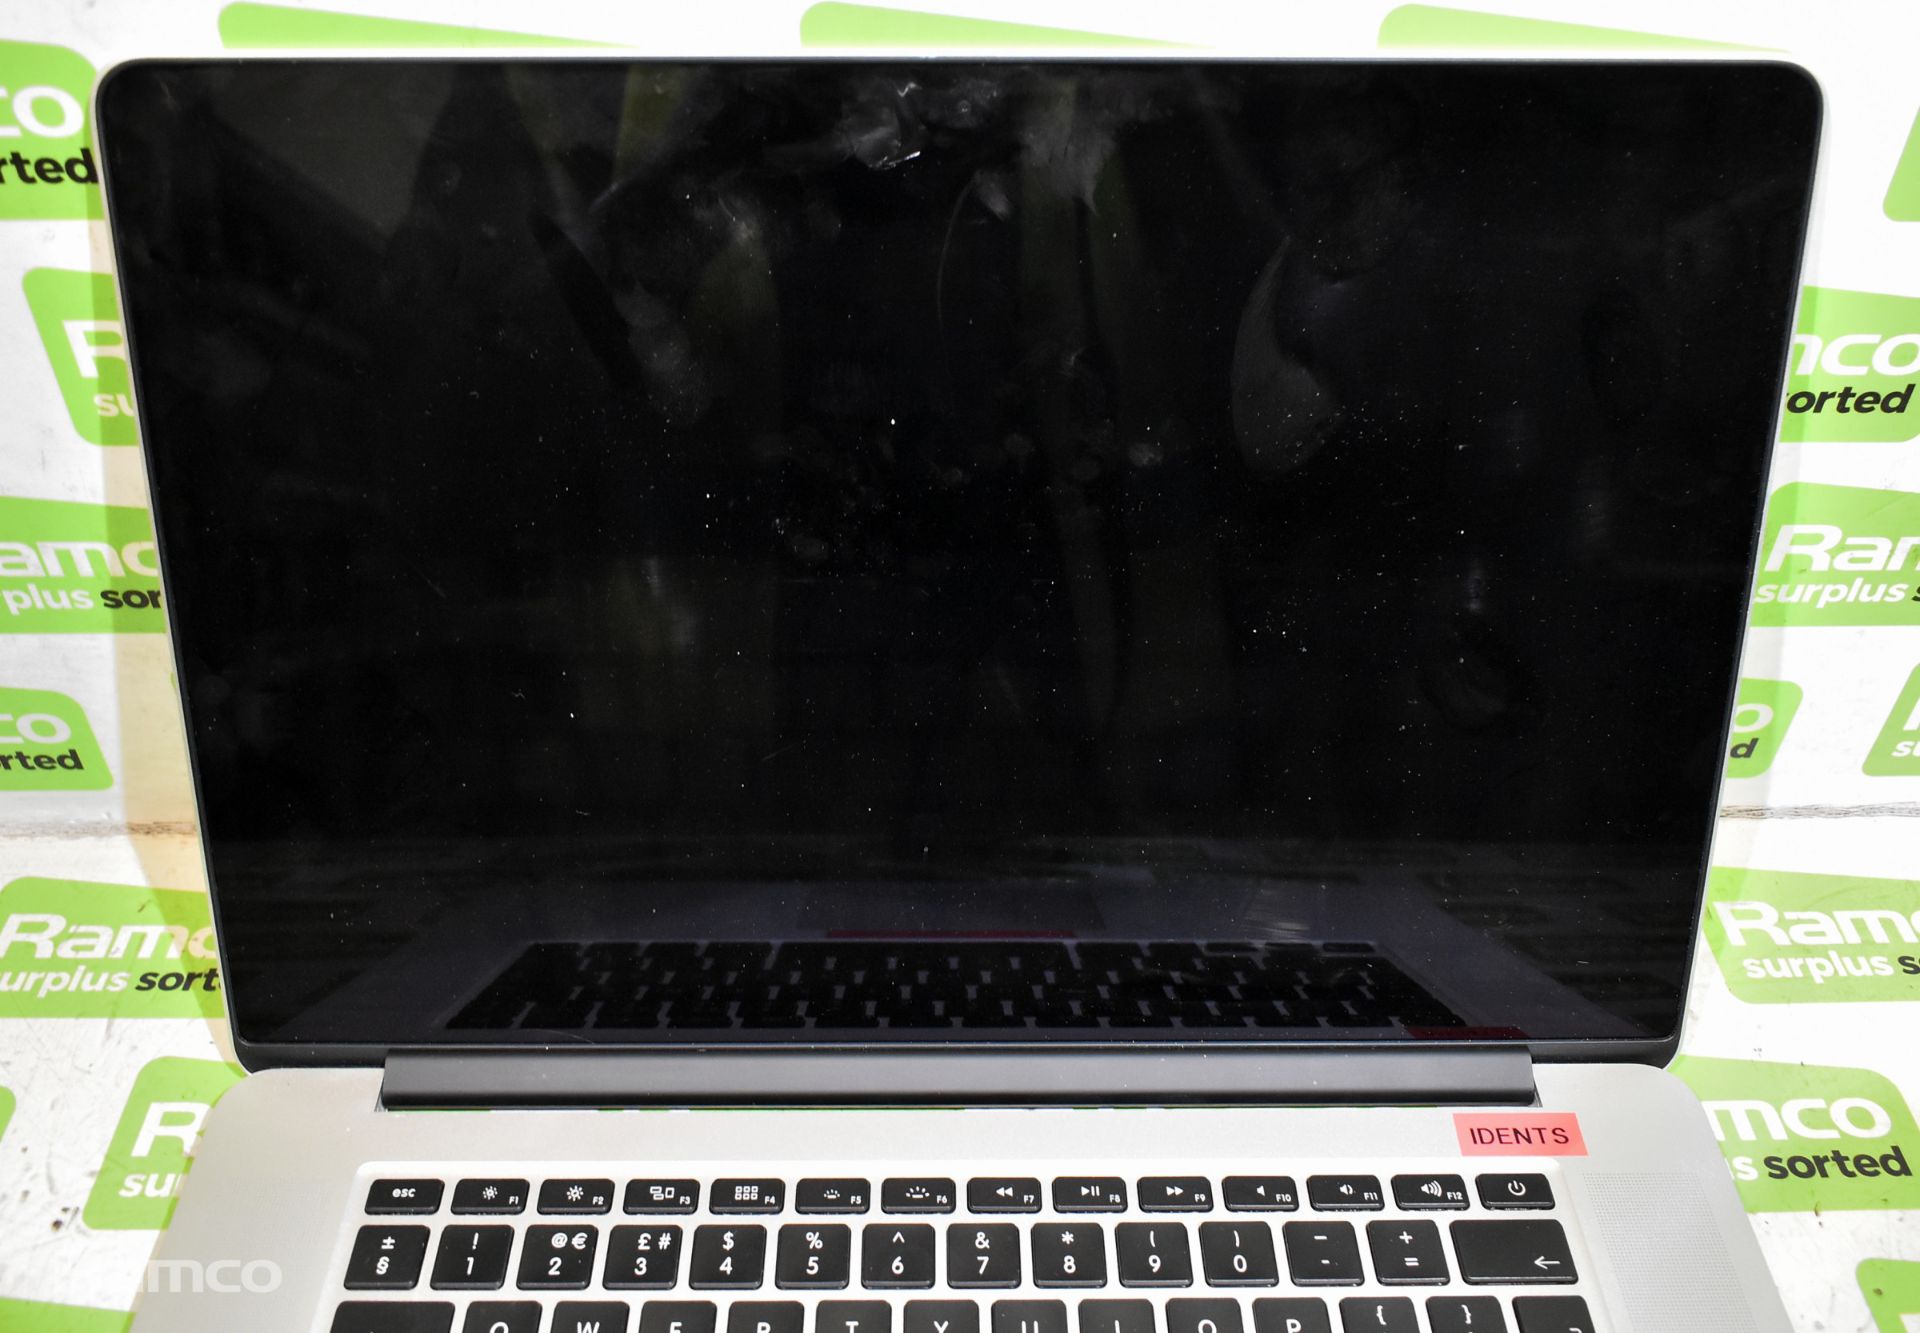 2015 15 inch Apple Macbook Pro - model number A1398 - NO CHARGER - Image 2 of 5